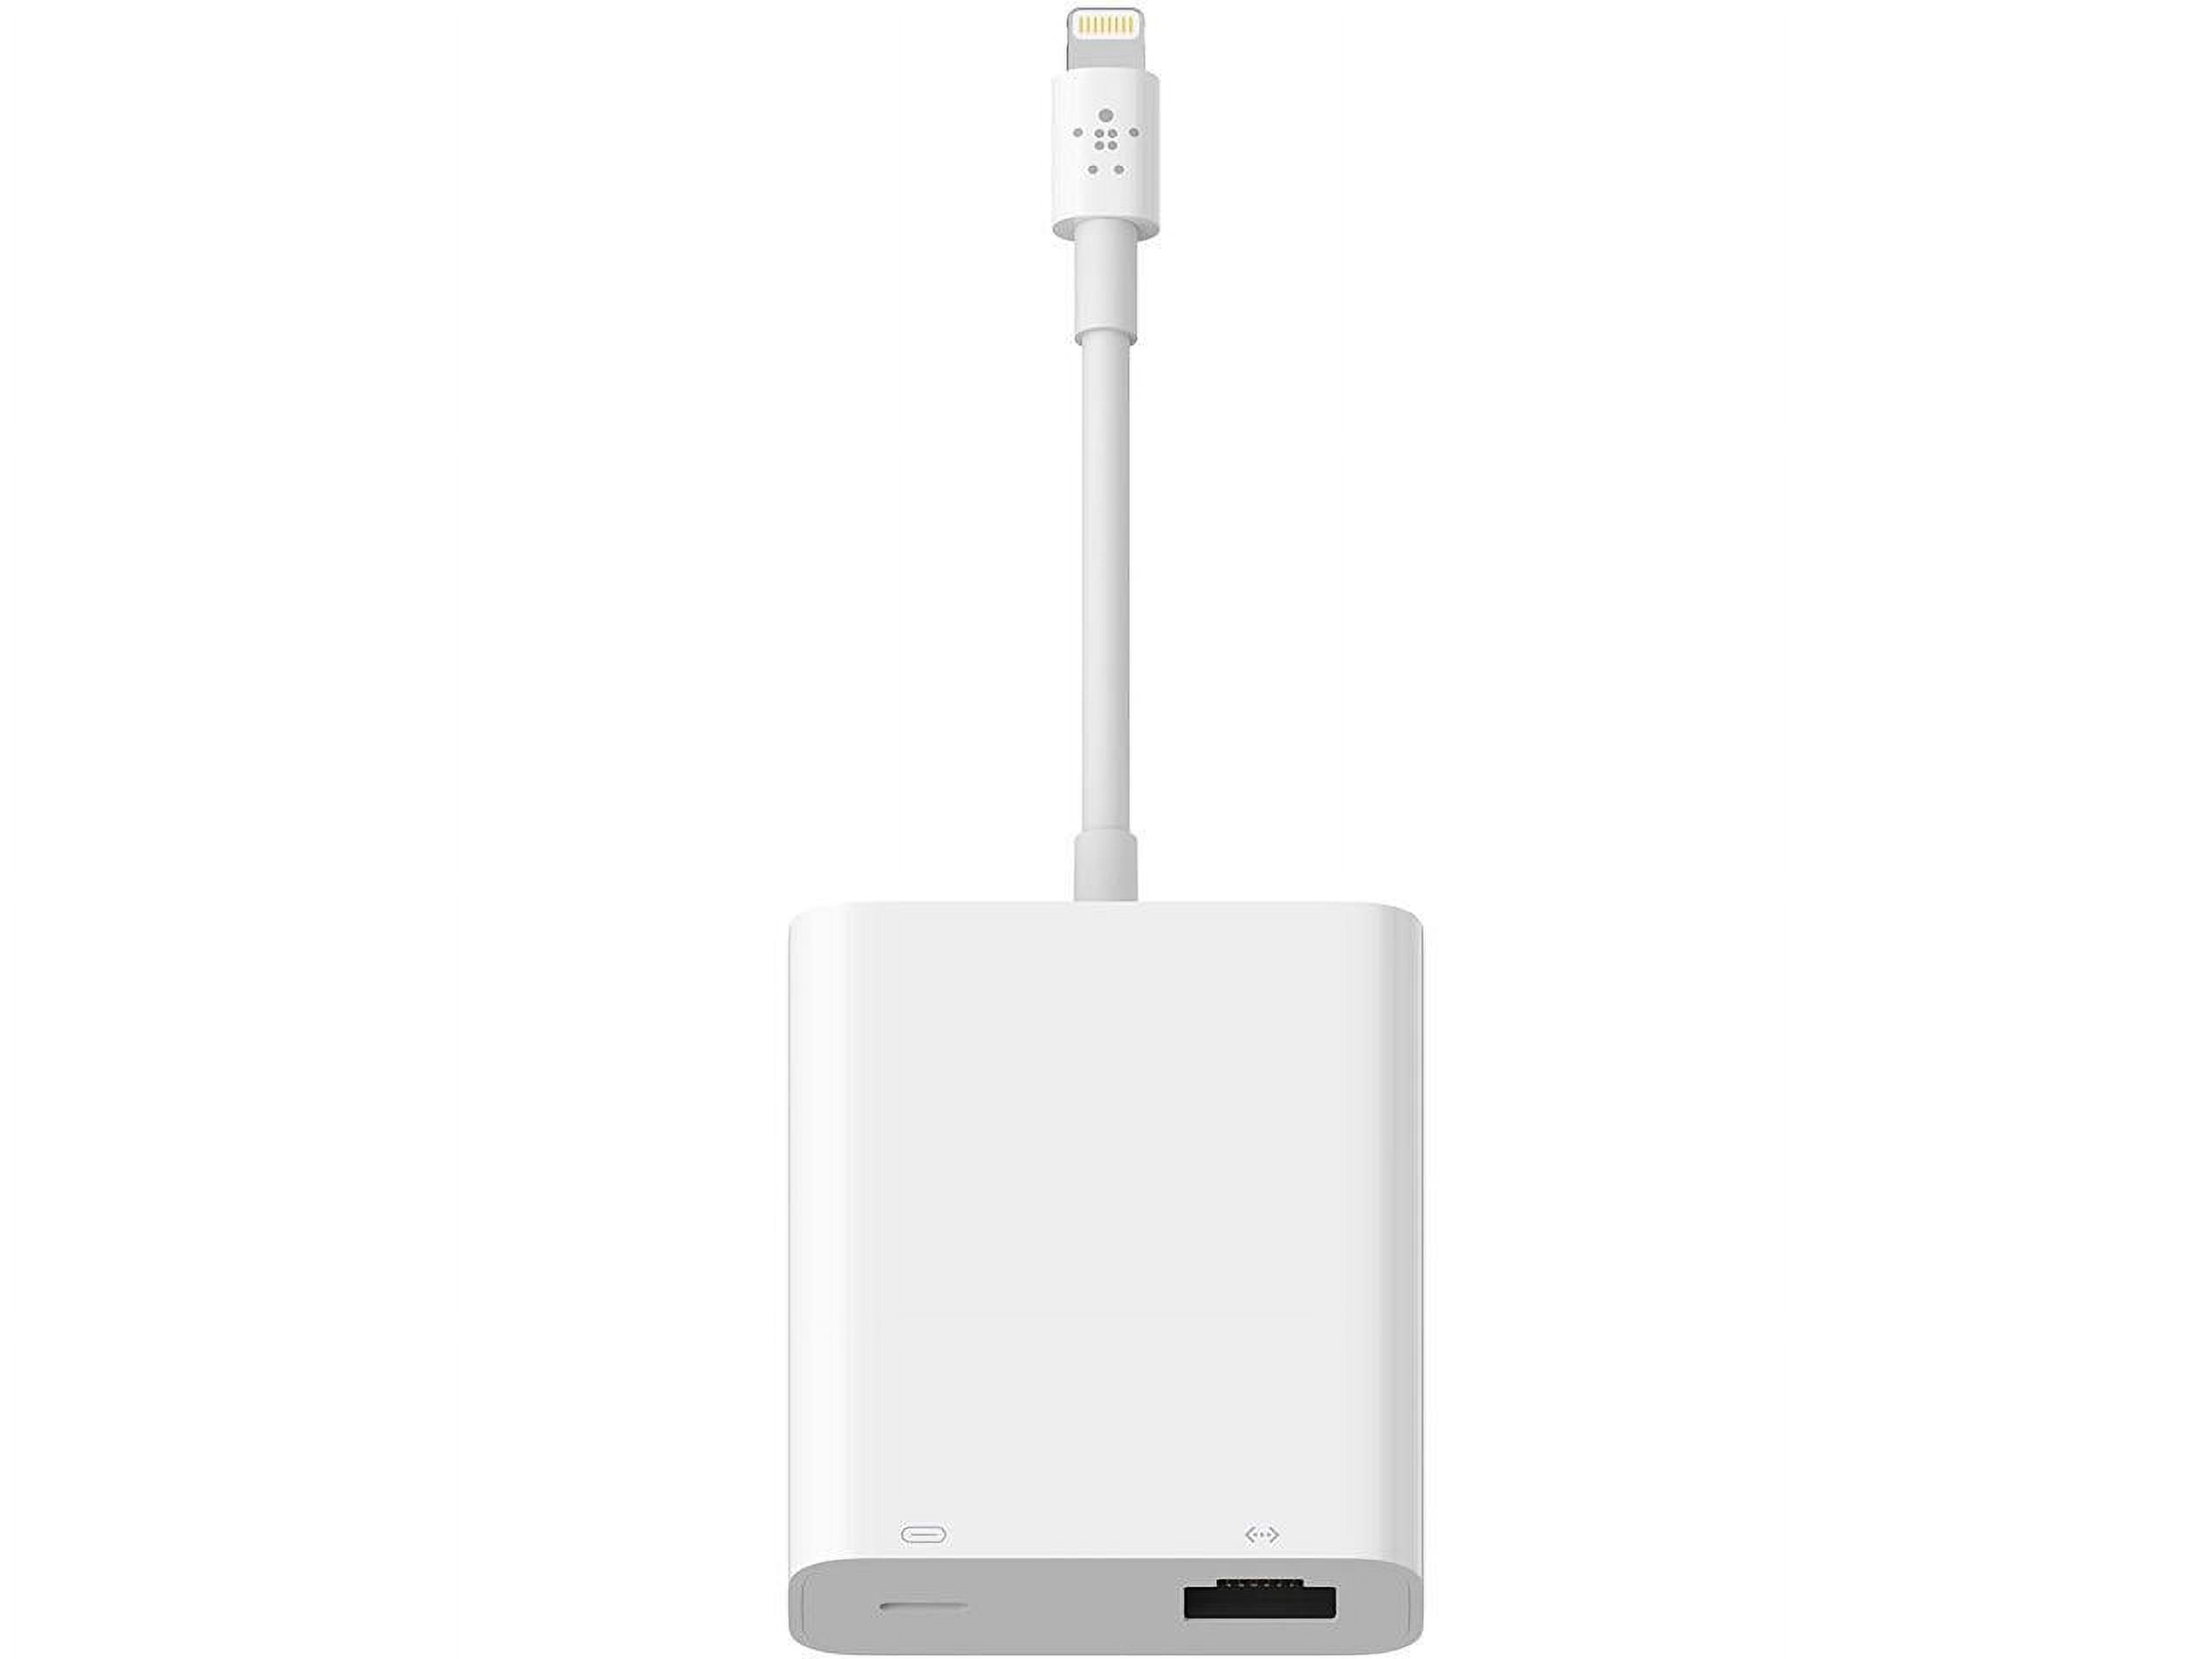 Belkin Ethernet + Power Adapter with Lightning Connector - image 2 of 5